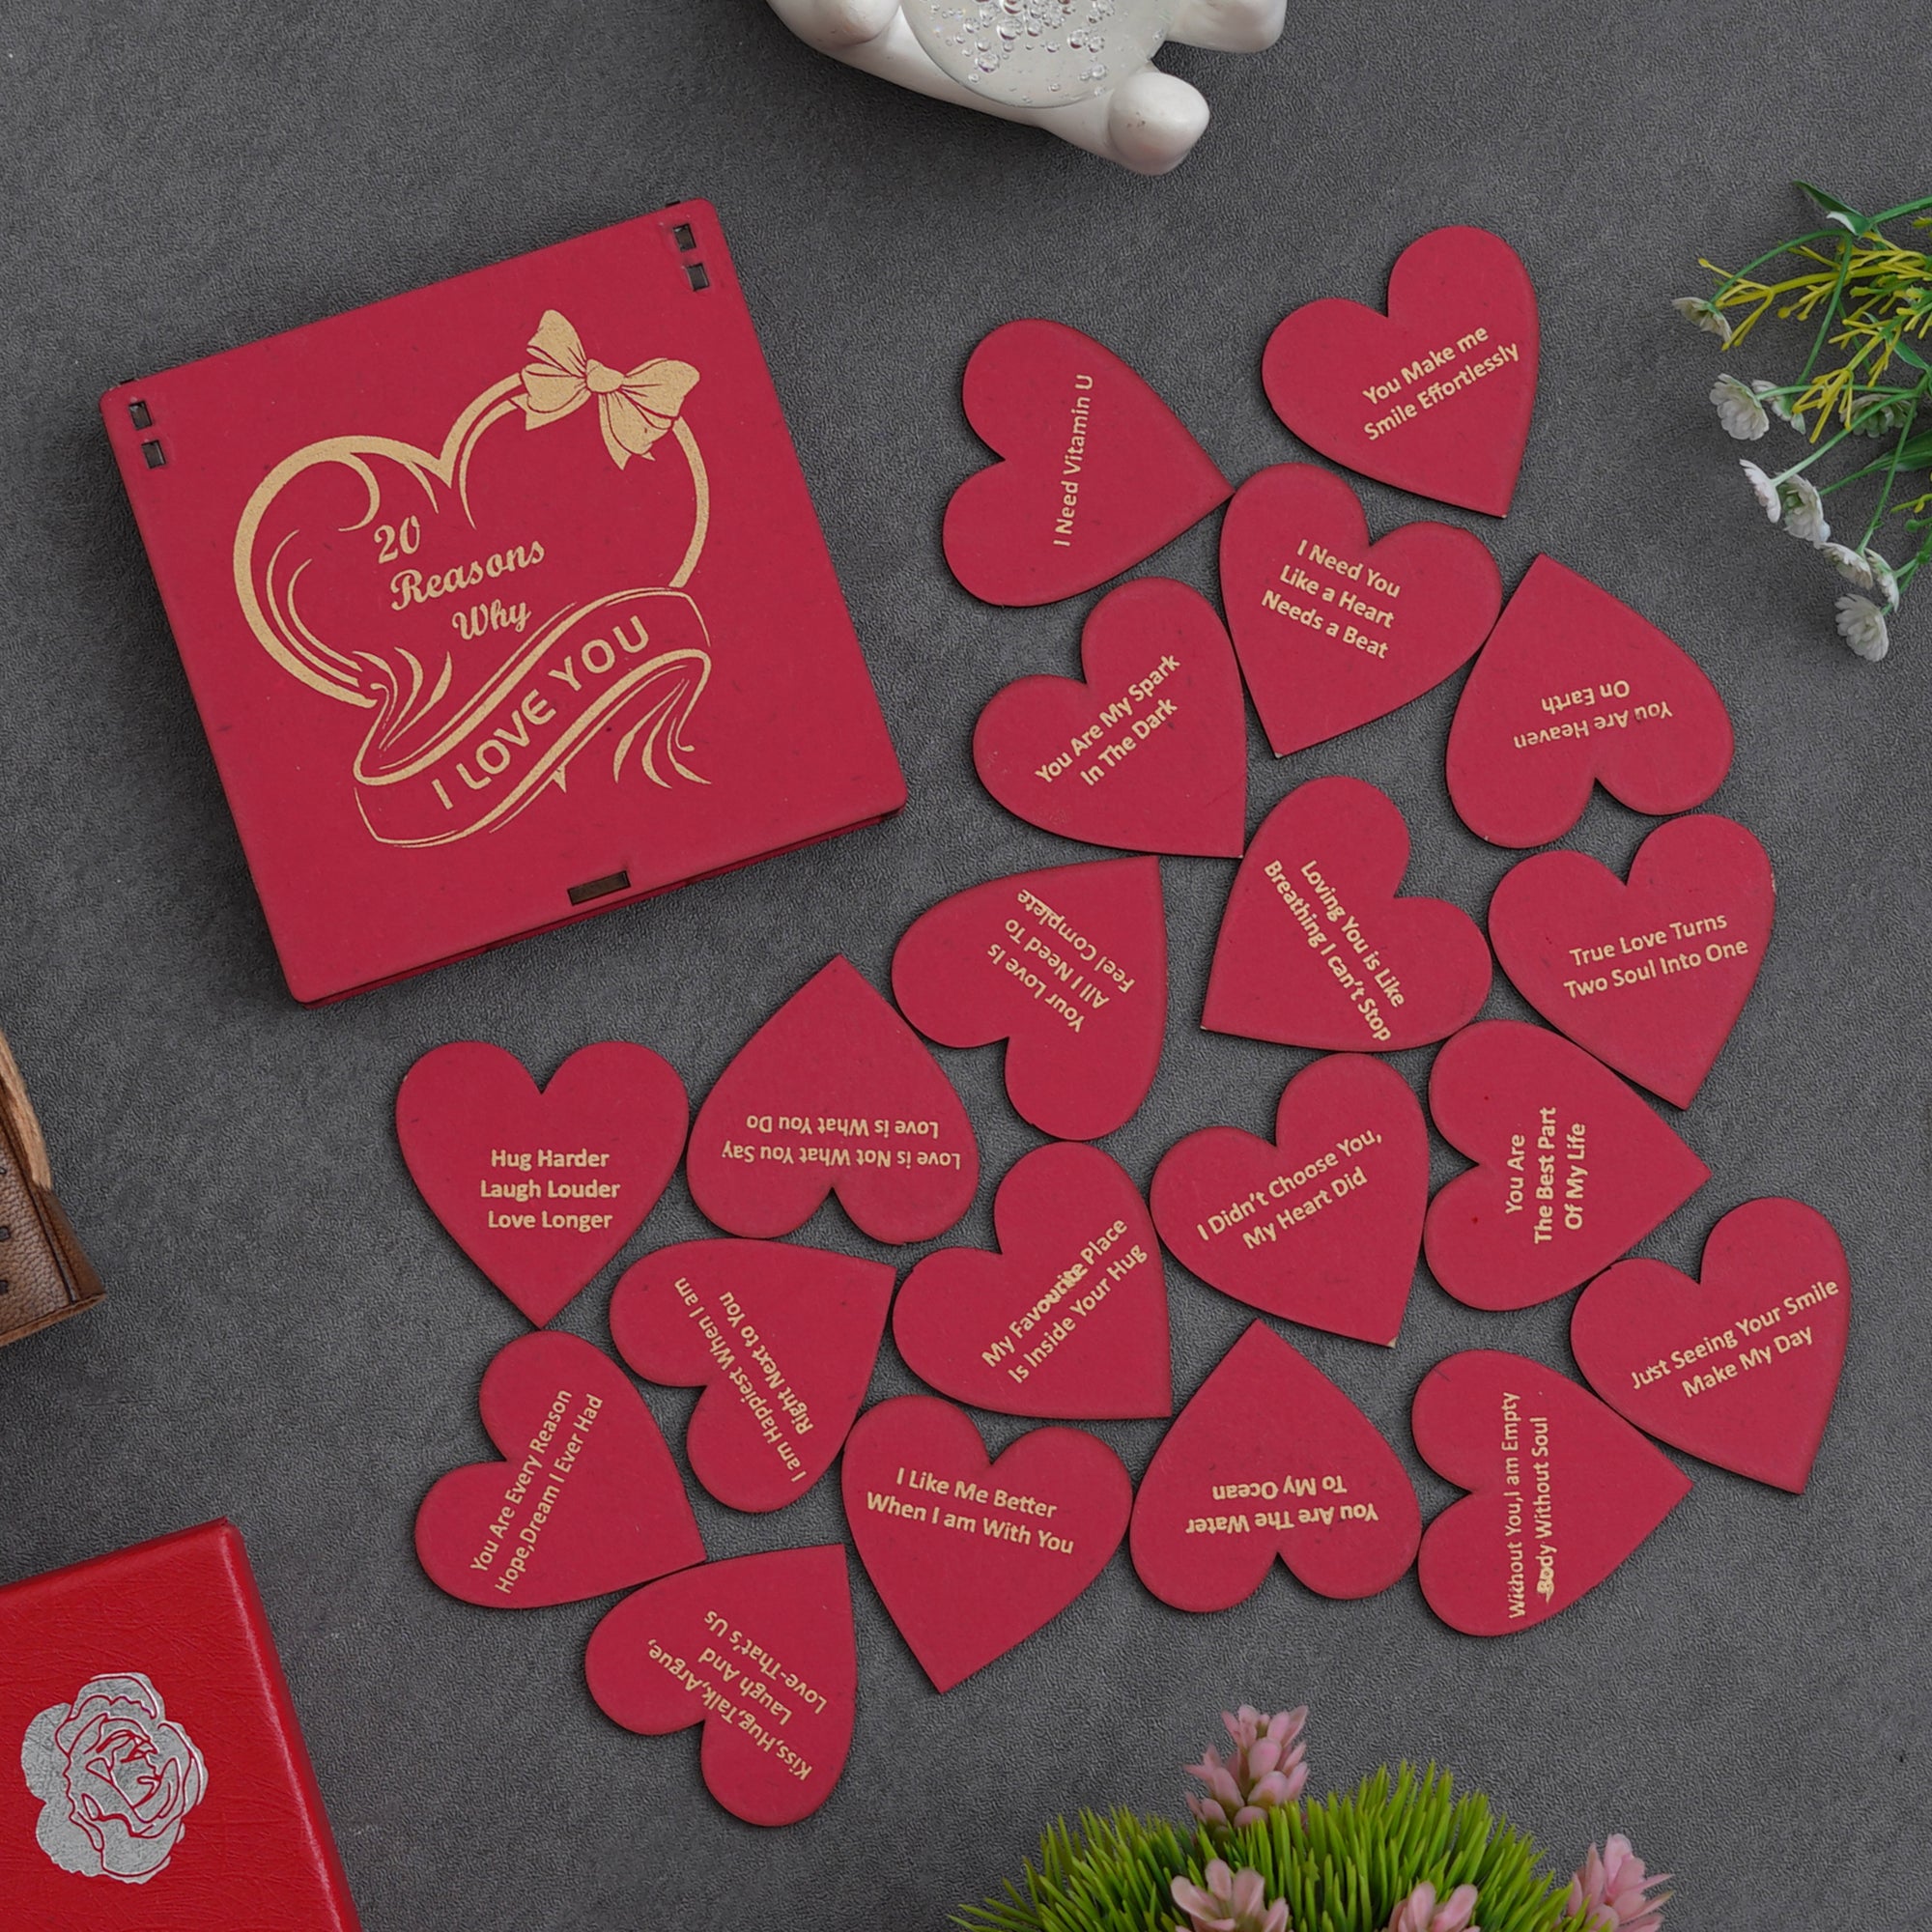 Valentine Combo of Pack of 12 Love Coupons Gift Cards Set, Red Gift Box with Teddy & Roses, "20 Reasons Why I Love You" Printed on Little Red Hearts Decorative Wooden Gift Set Box 5